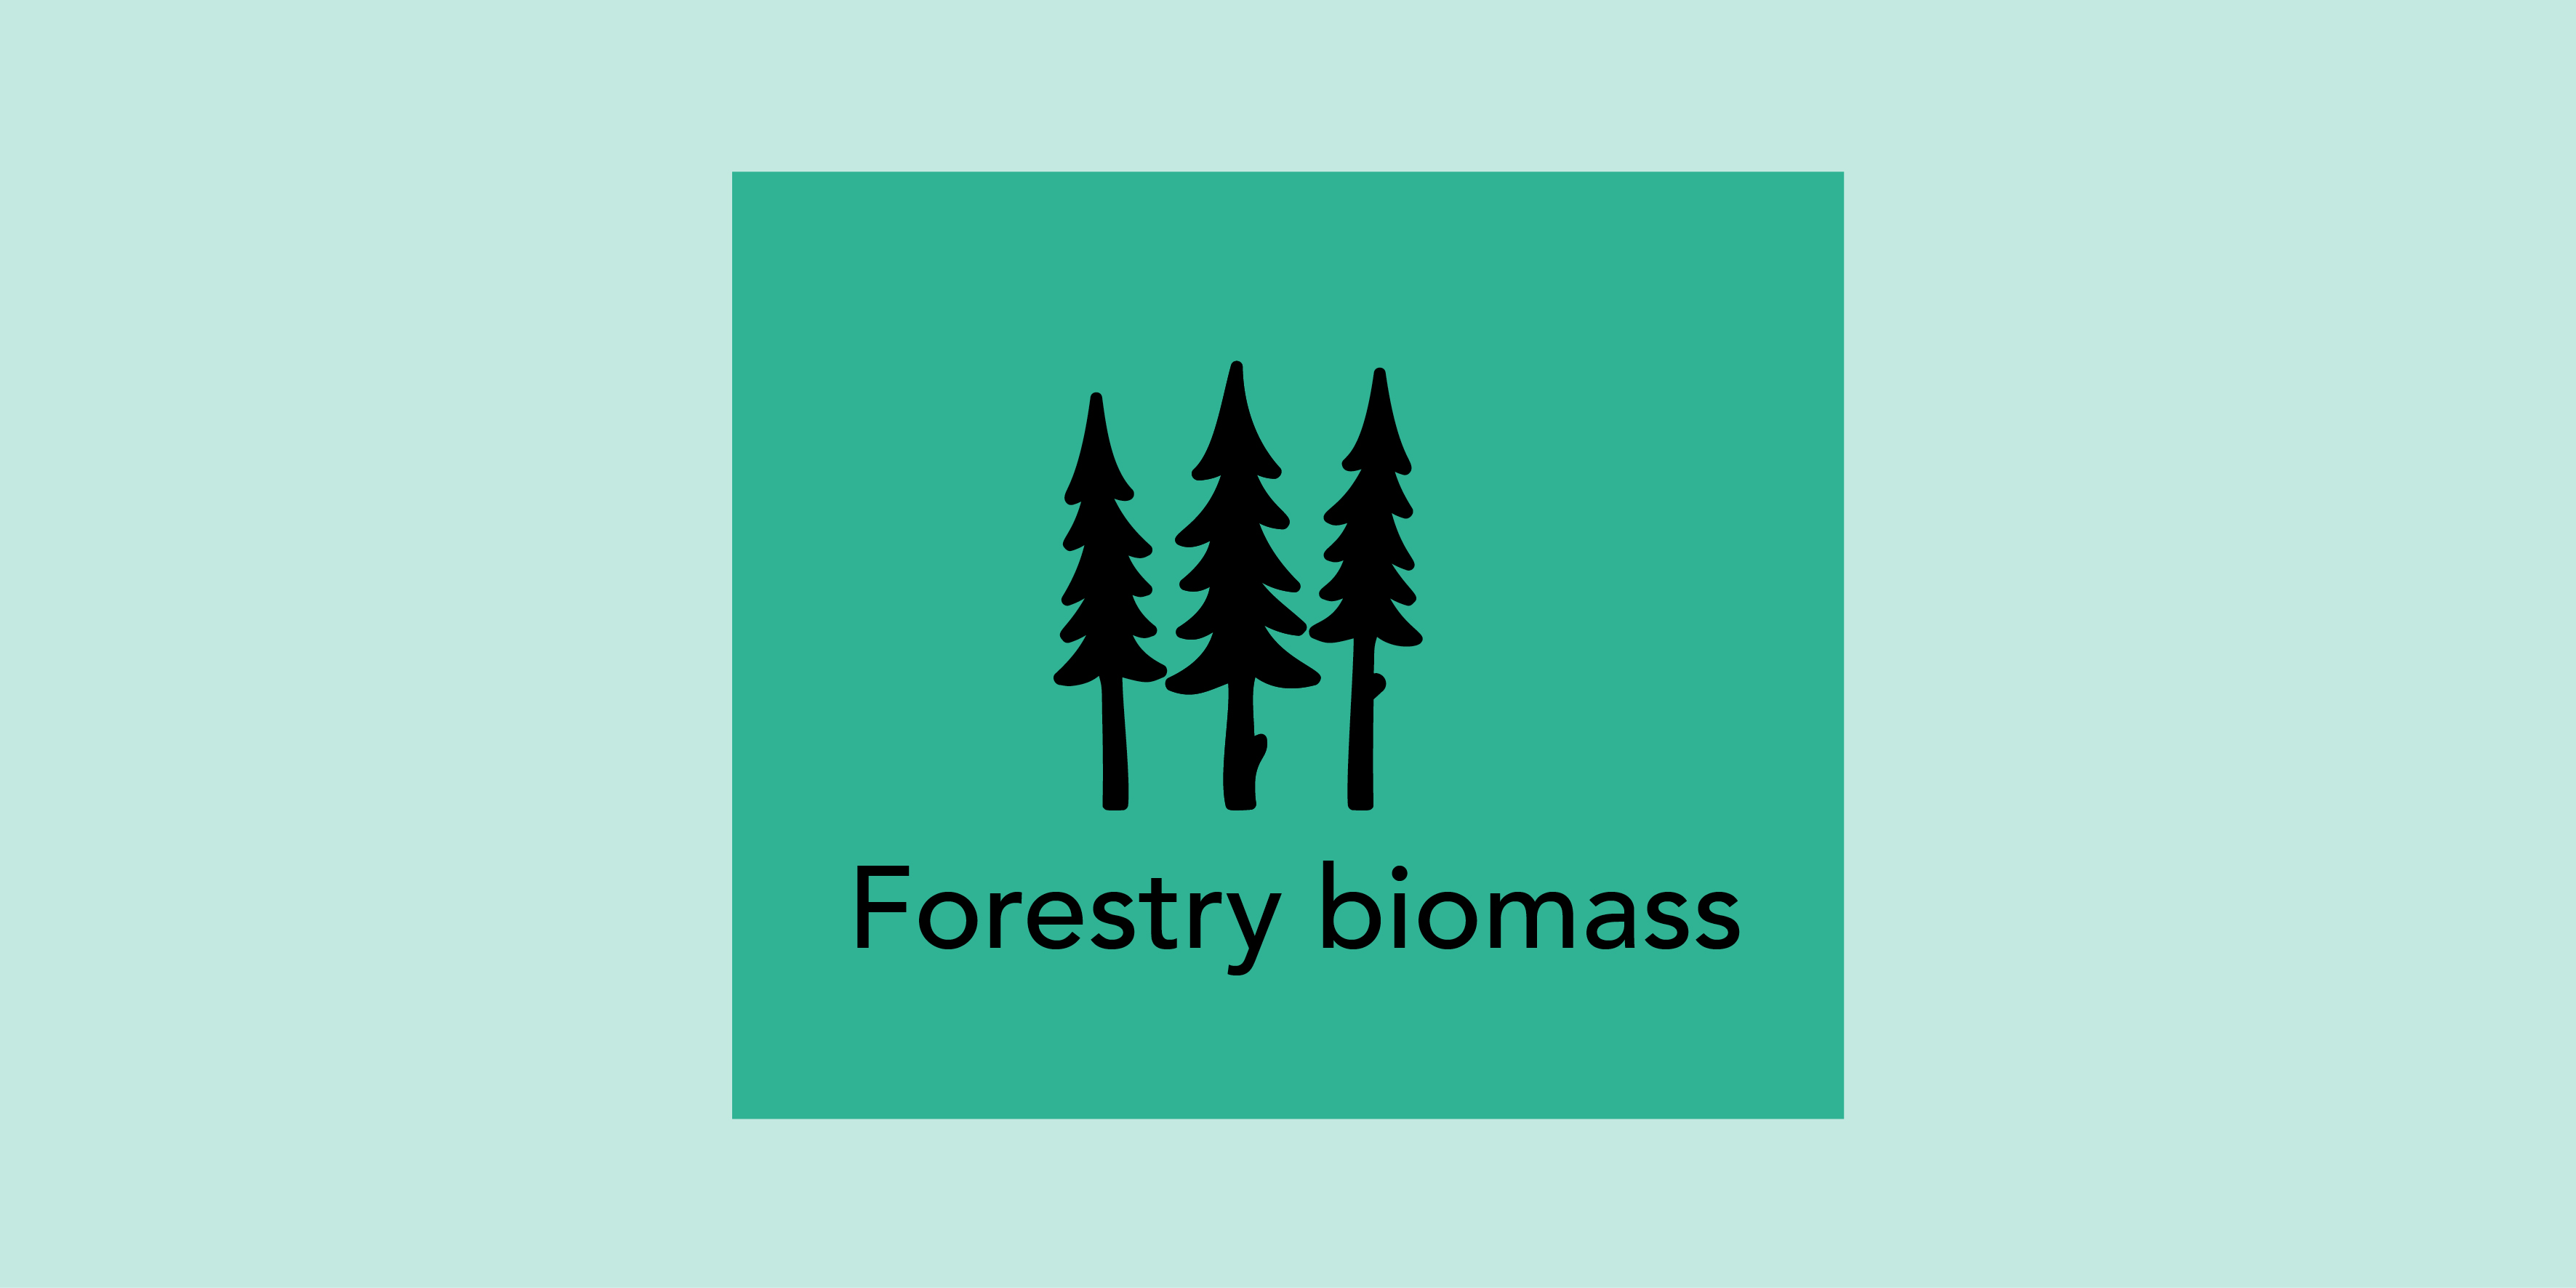 Biomass from forests and wood.